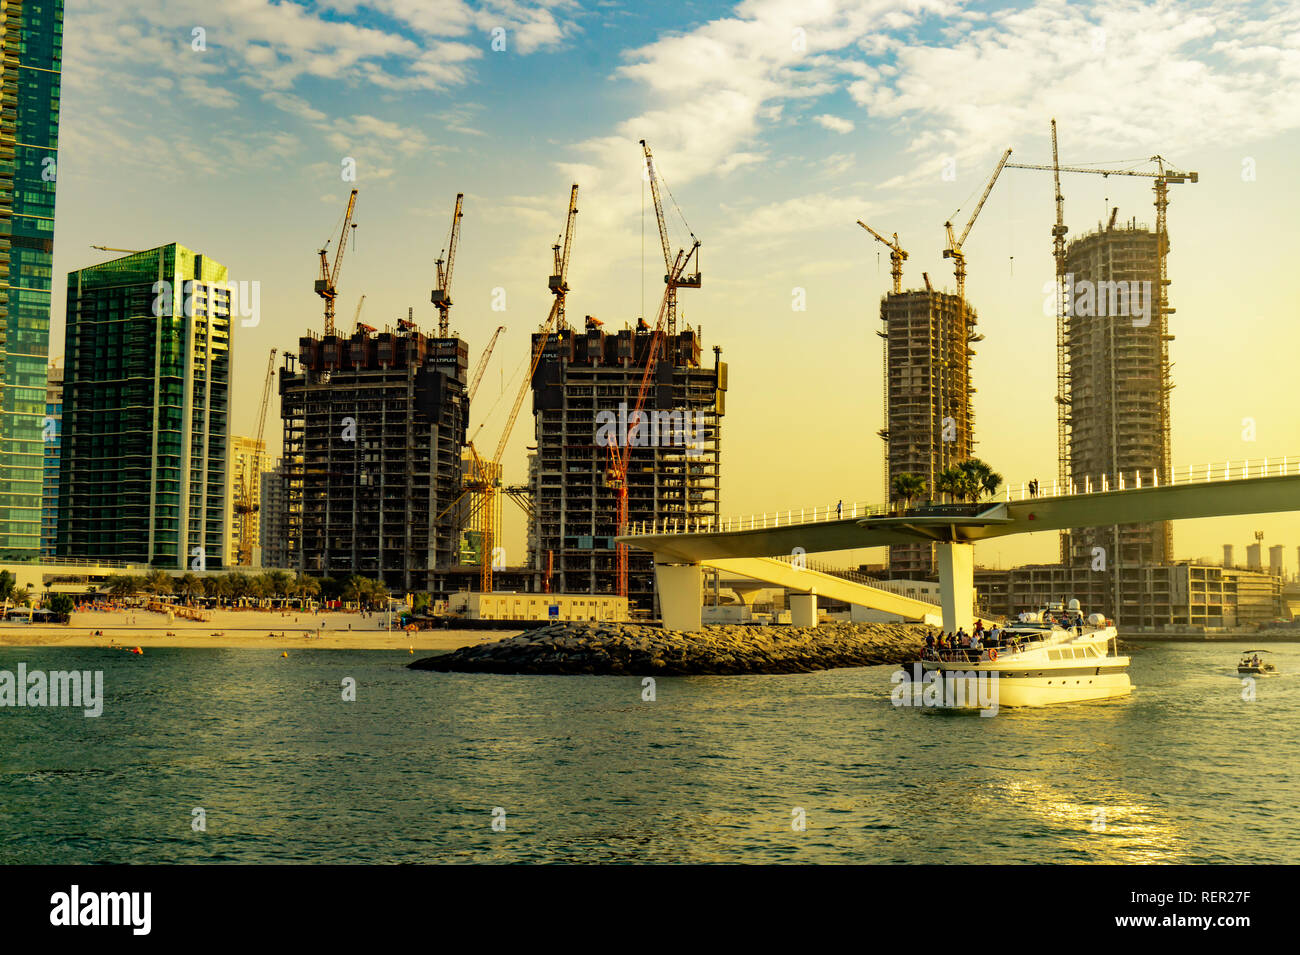 Dubai, UAE 11. 10. 2018 : Dubai contractions on the coast line with cranes everywere in sunset and a boat with tourists Stock Photo